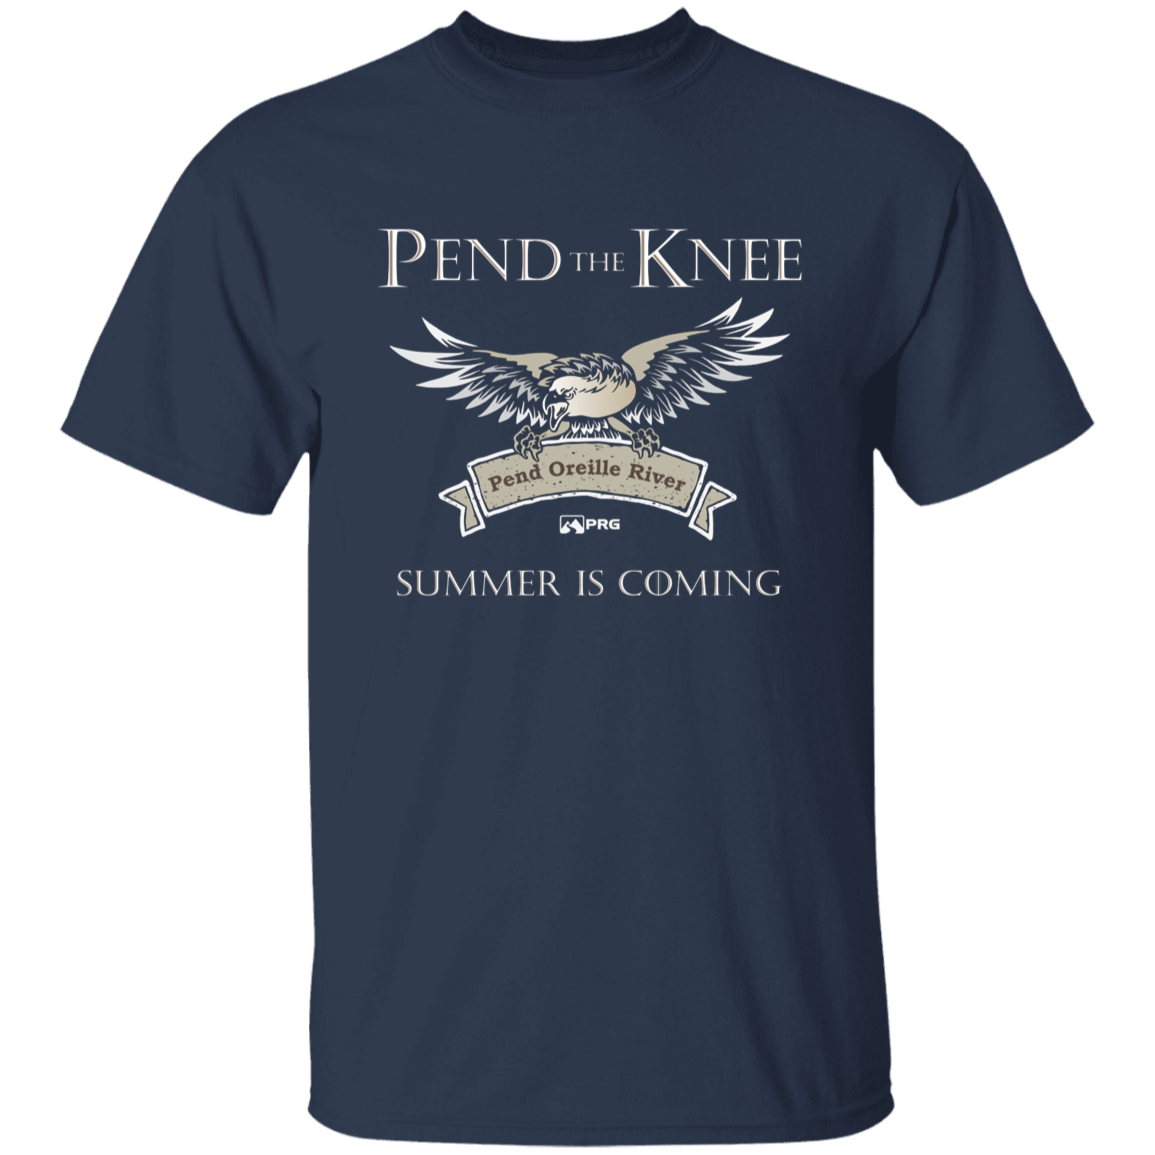 Pend the Knee - Youth Shirt